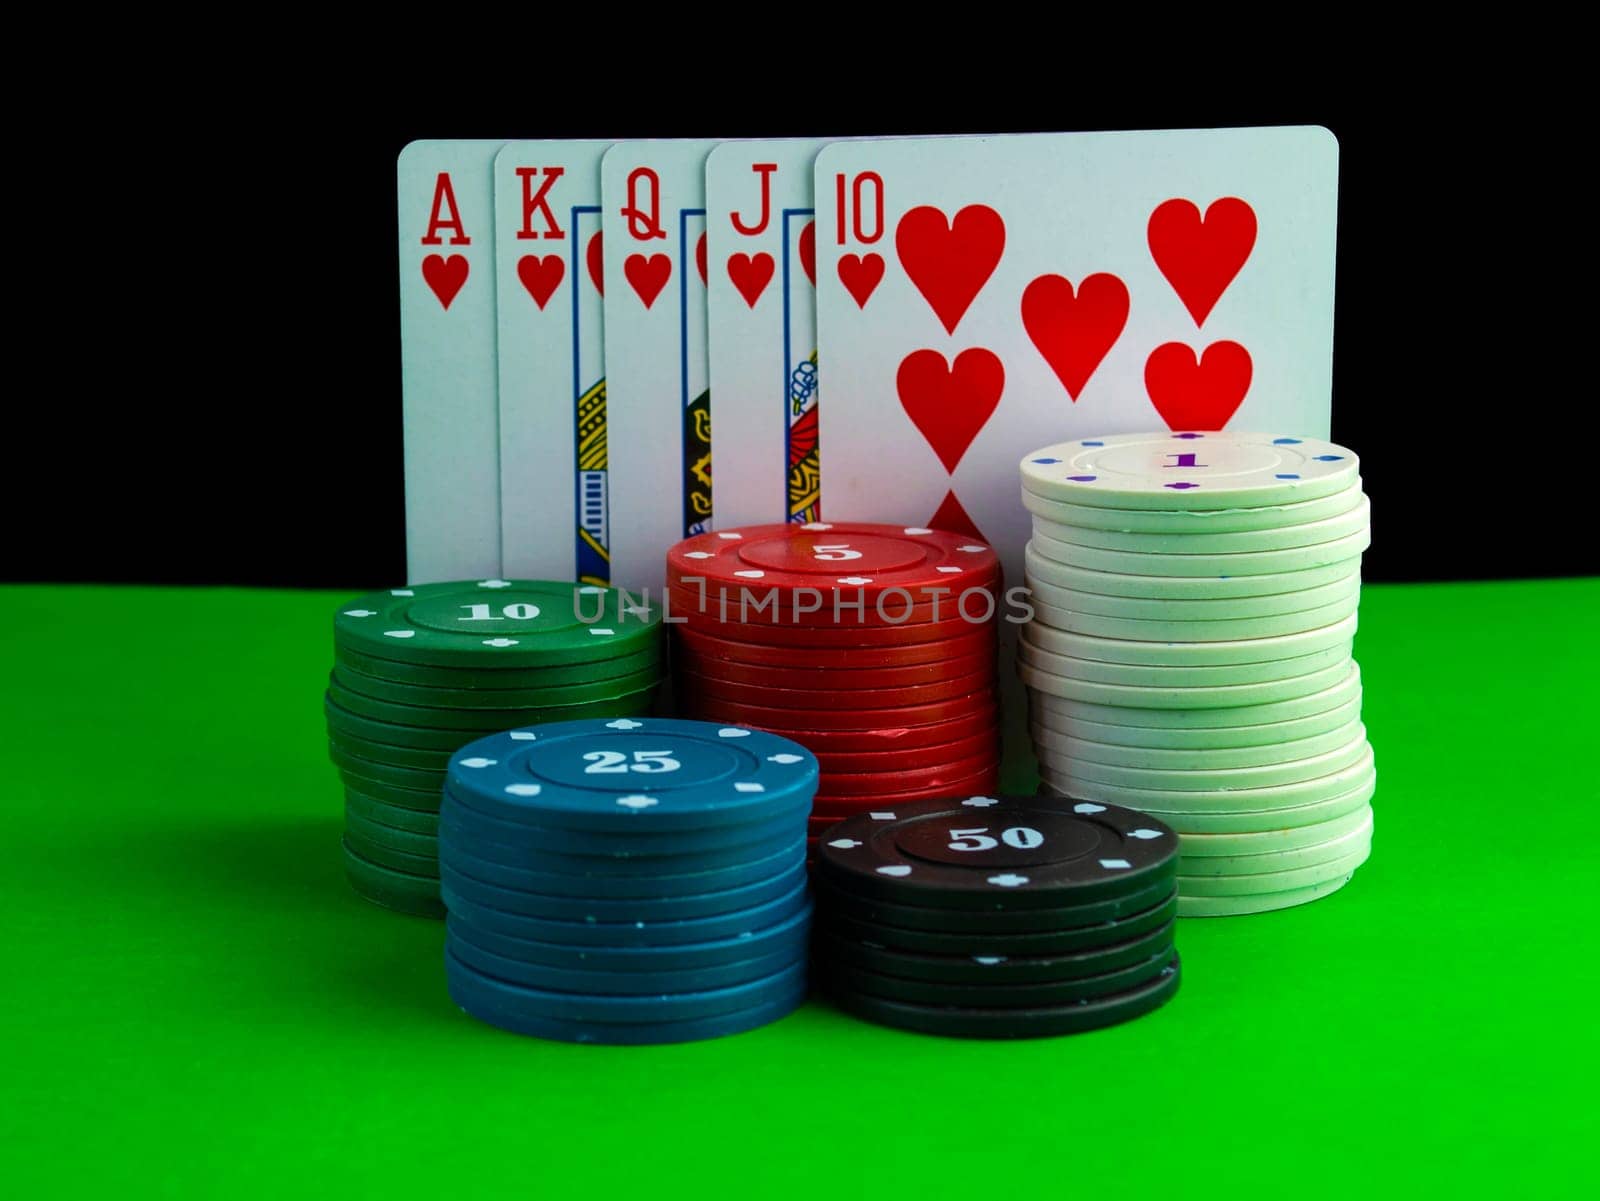 Royal flush cards and poker chips in stacks on the table. Cards on the table with a combination of royal flush and poker chips.